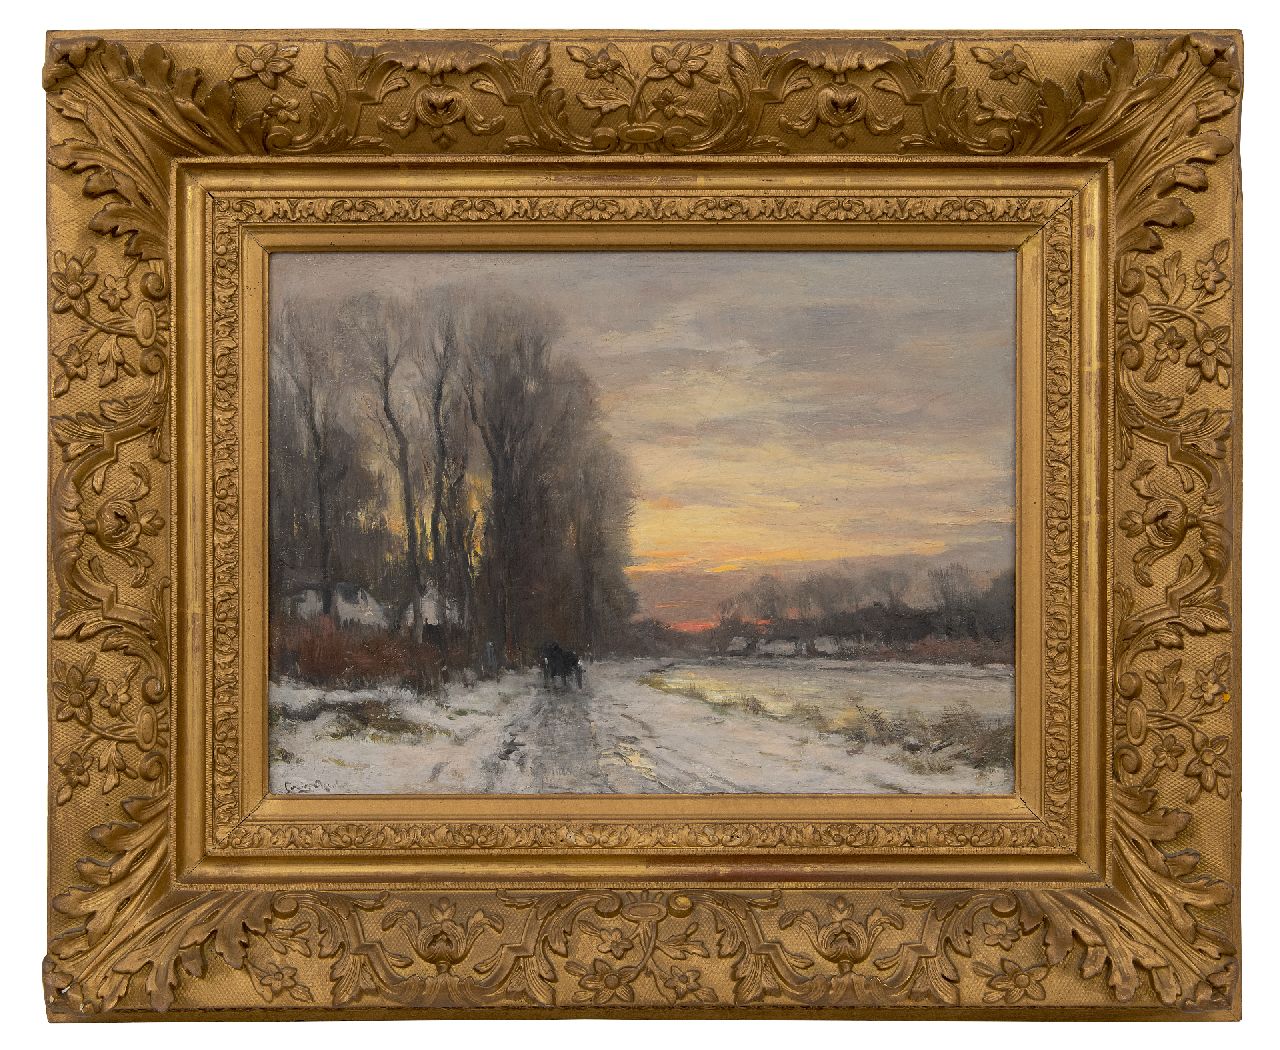 Apol L.F.H.  | Lodewijk Franciscus Hendrik 'Louis' Apol | Paintings offered for sale | Snow landscape at sunset, oil on canvas 31.5 x 42.4 cm, signed l.l.